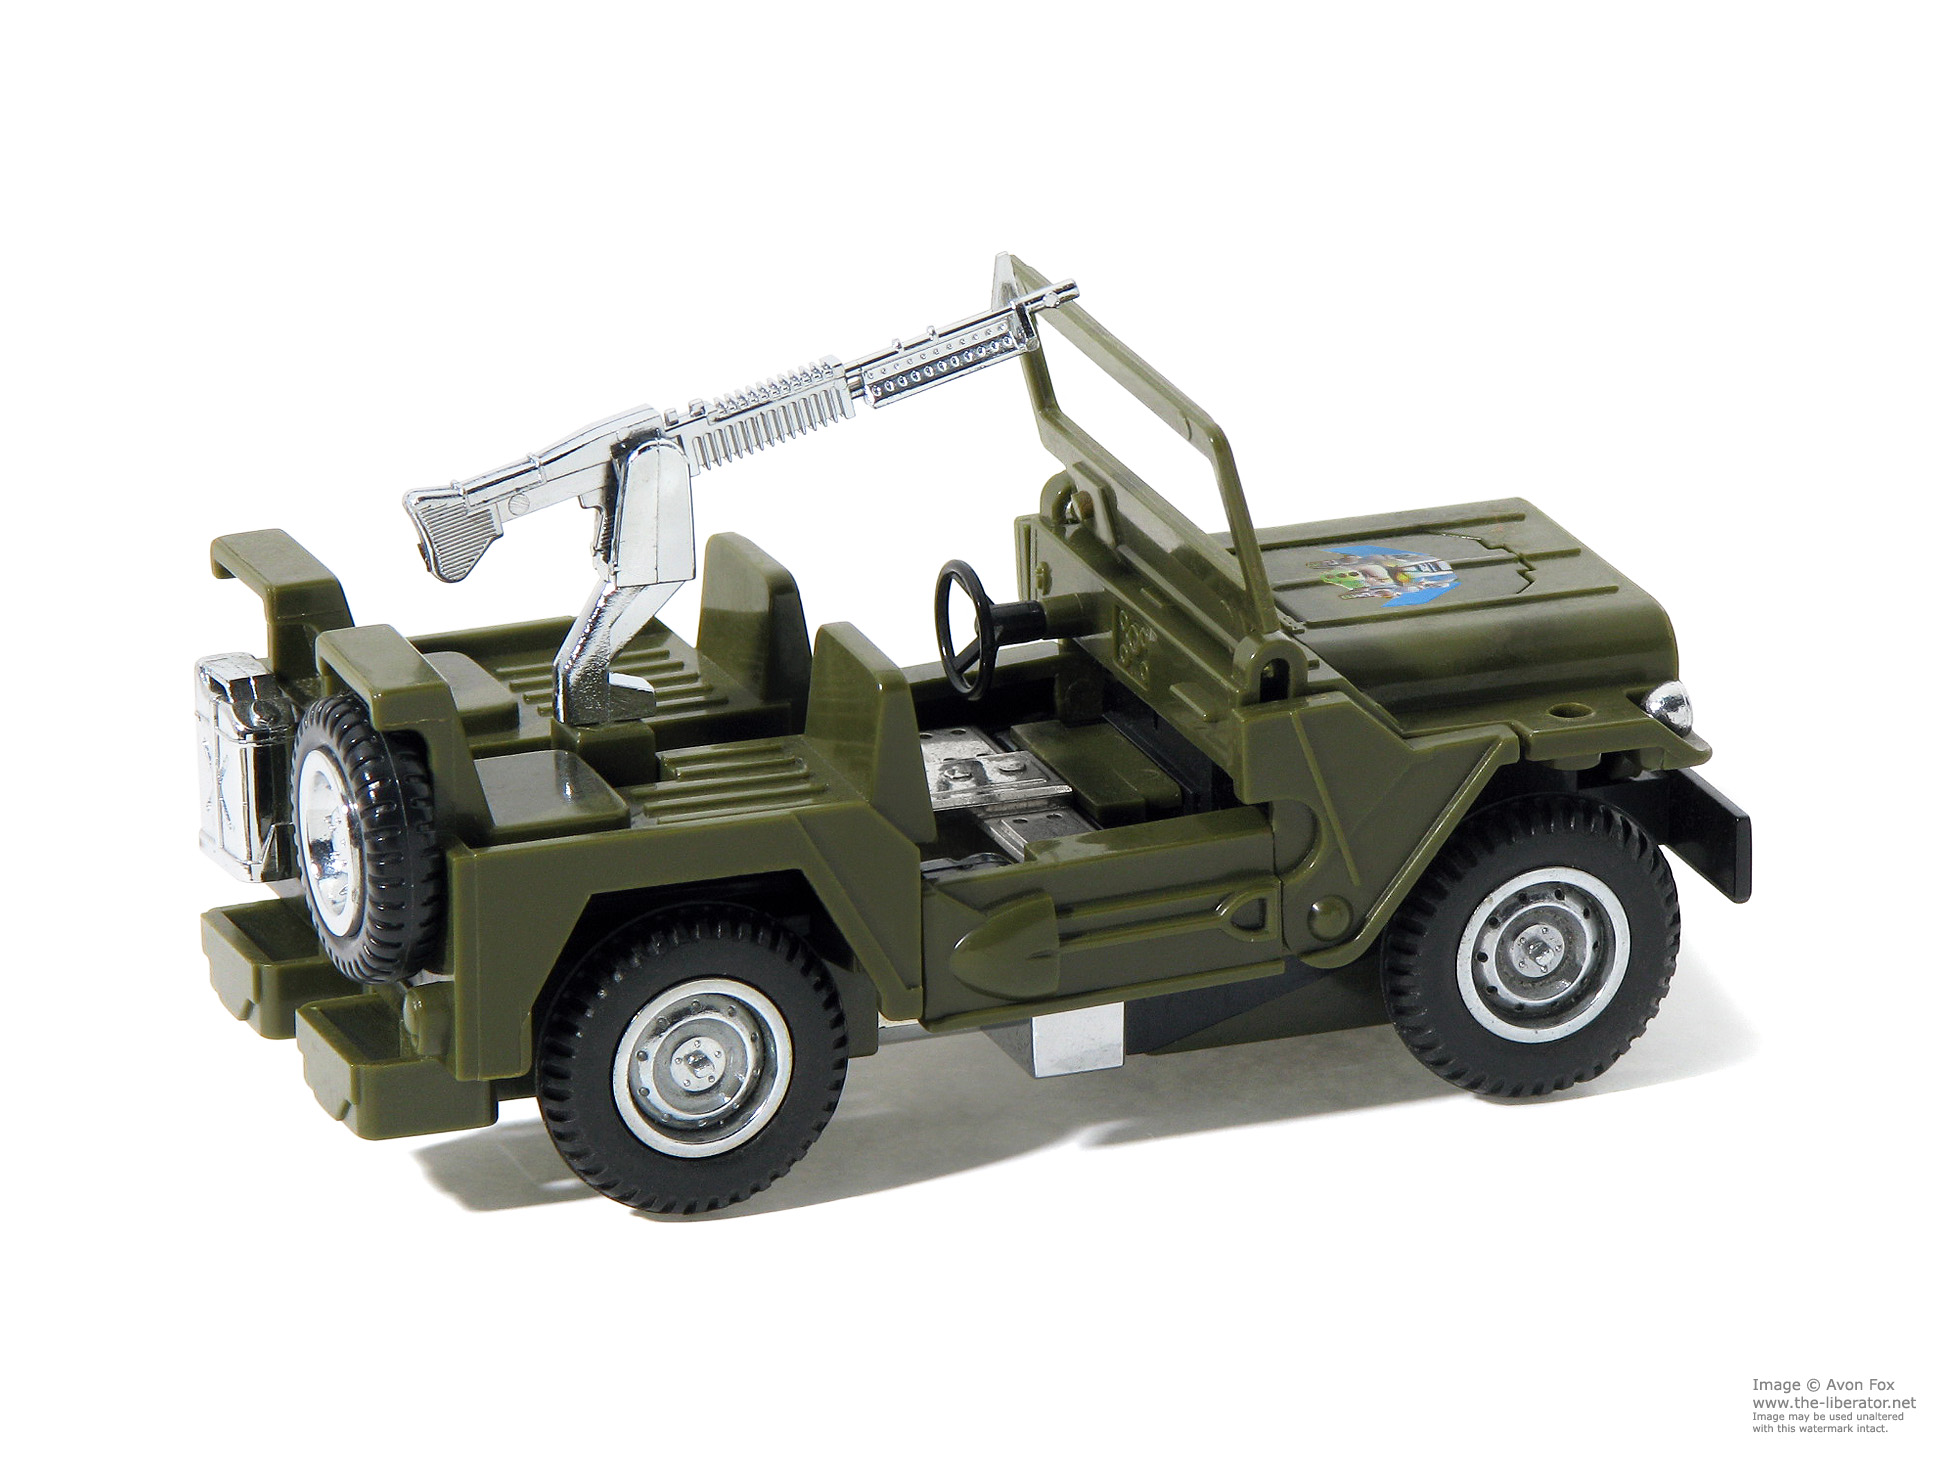 Convertible Jeep transforming robot military jeep released by Dah Yang ...